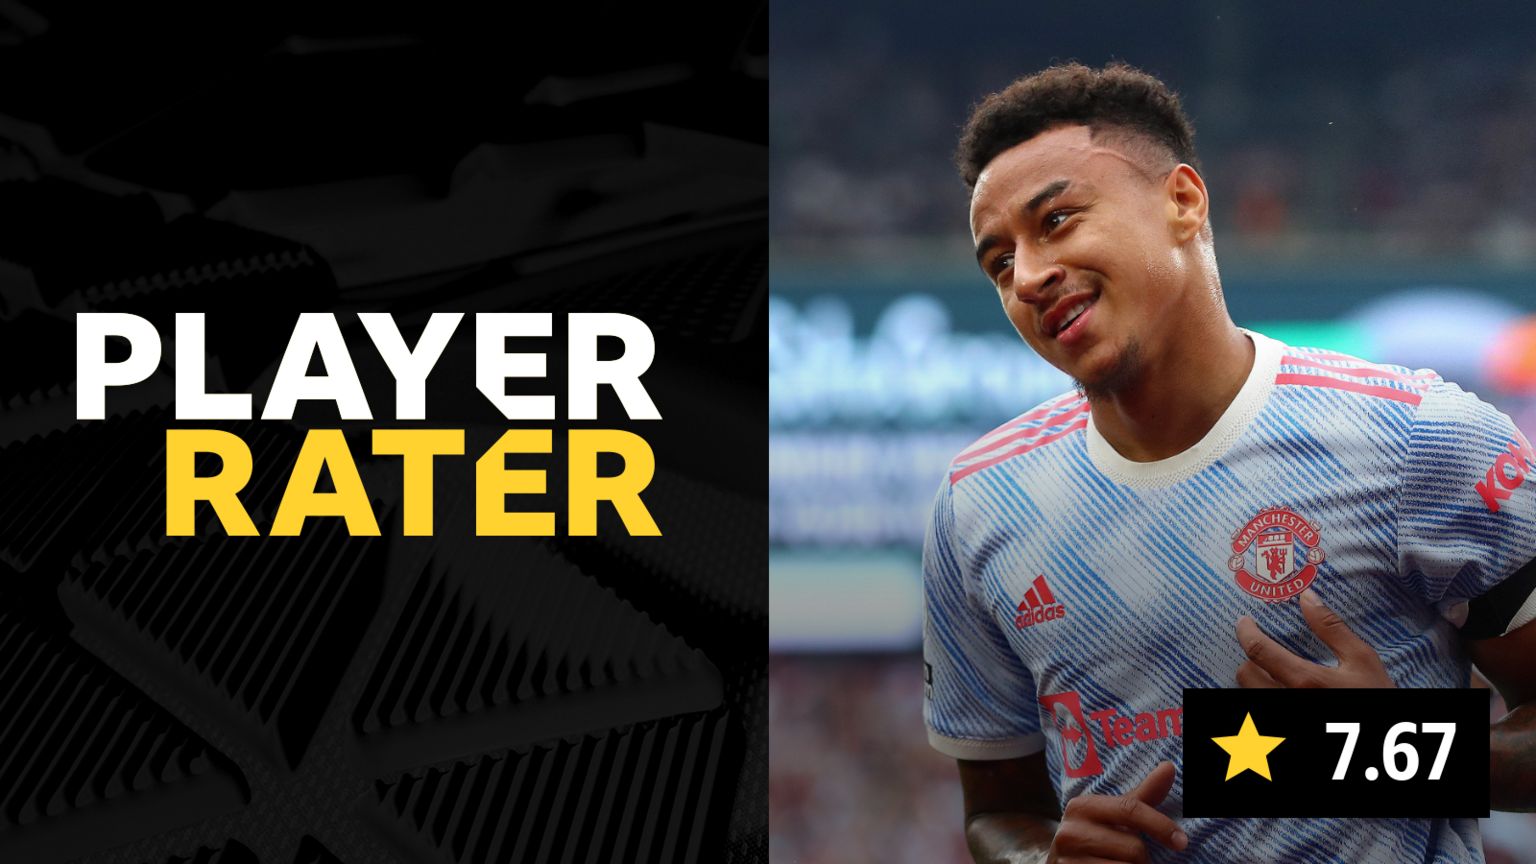 Jesse Lingard scored an average of 7.67 in our Player Rater